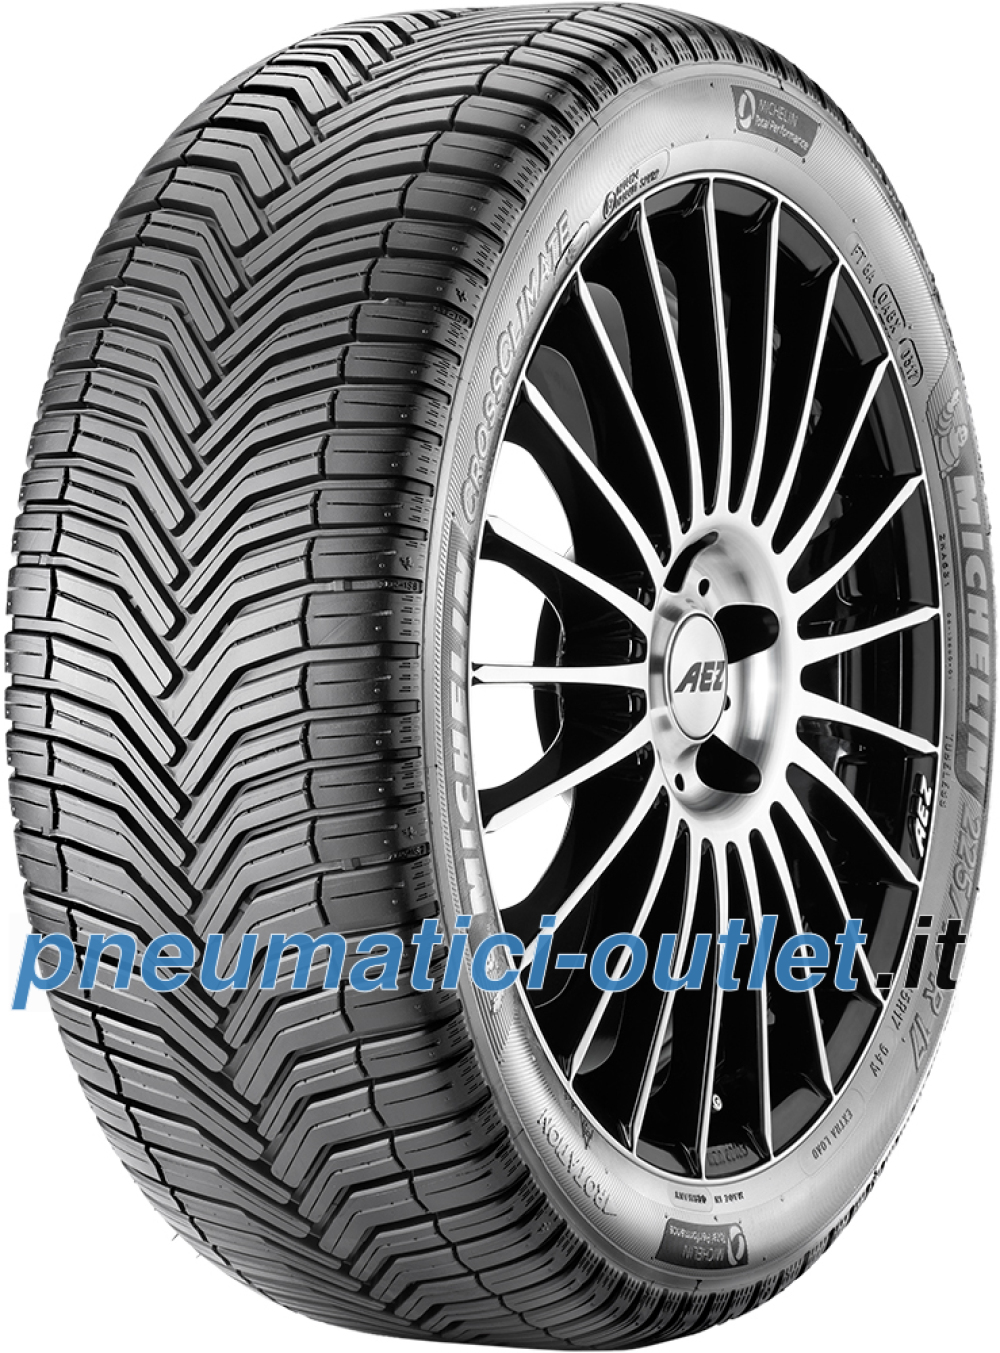 Michelin CrossClimate +. Only € 178,06